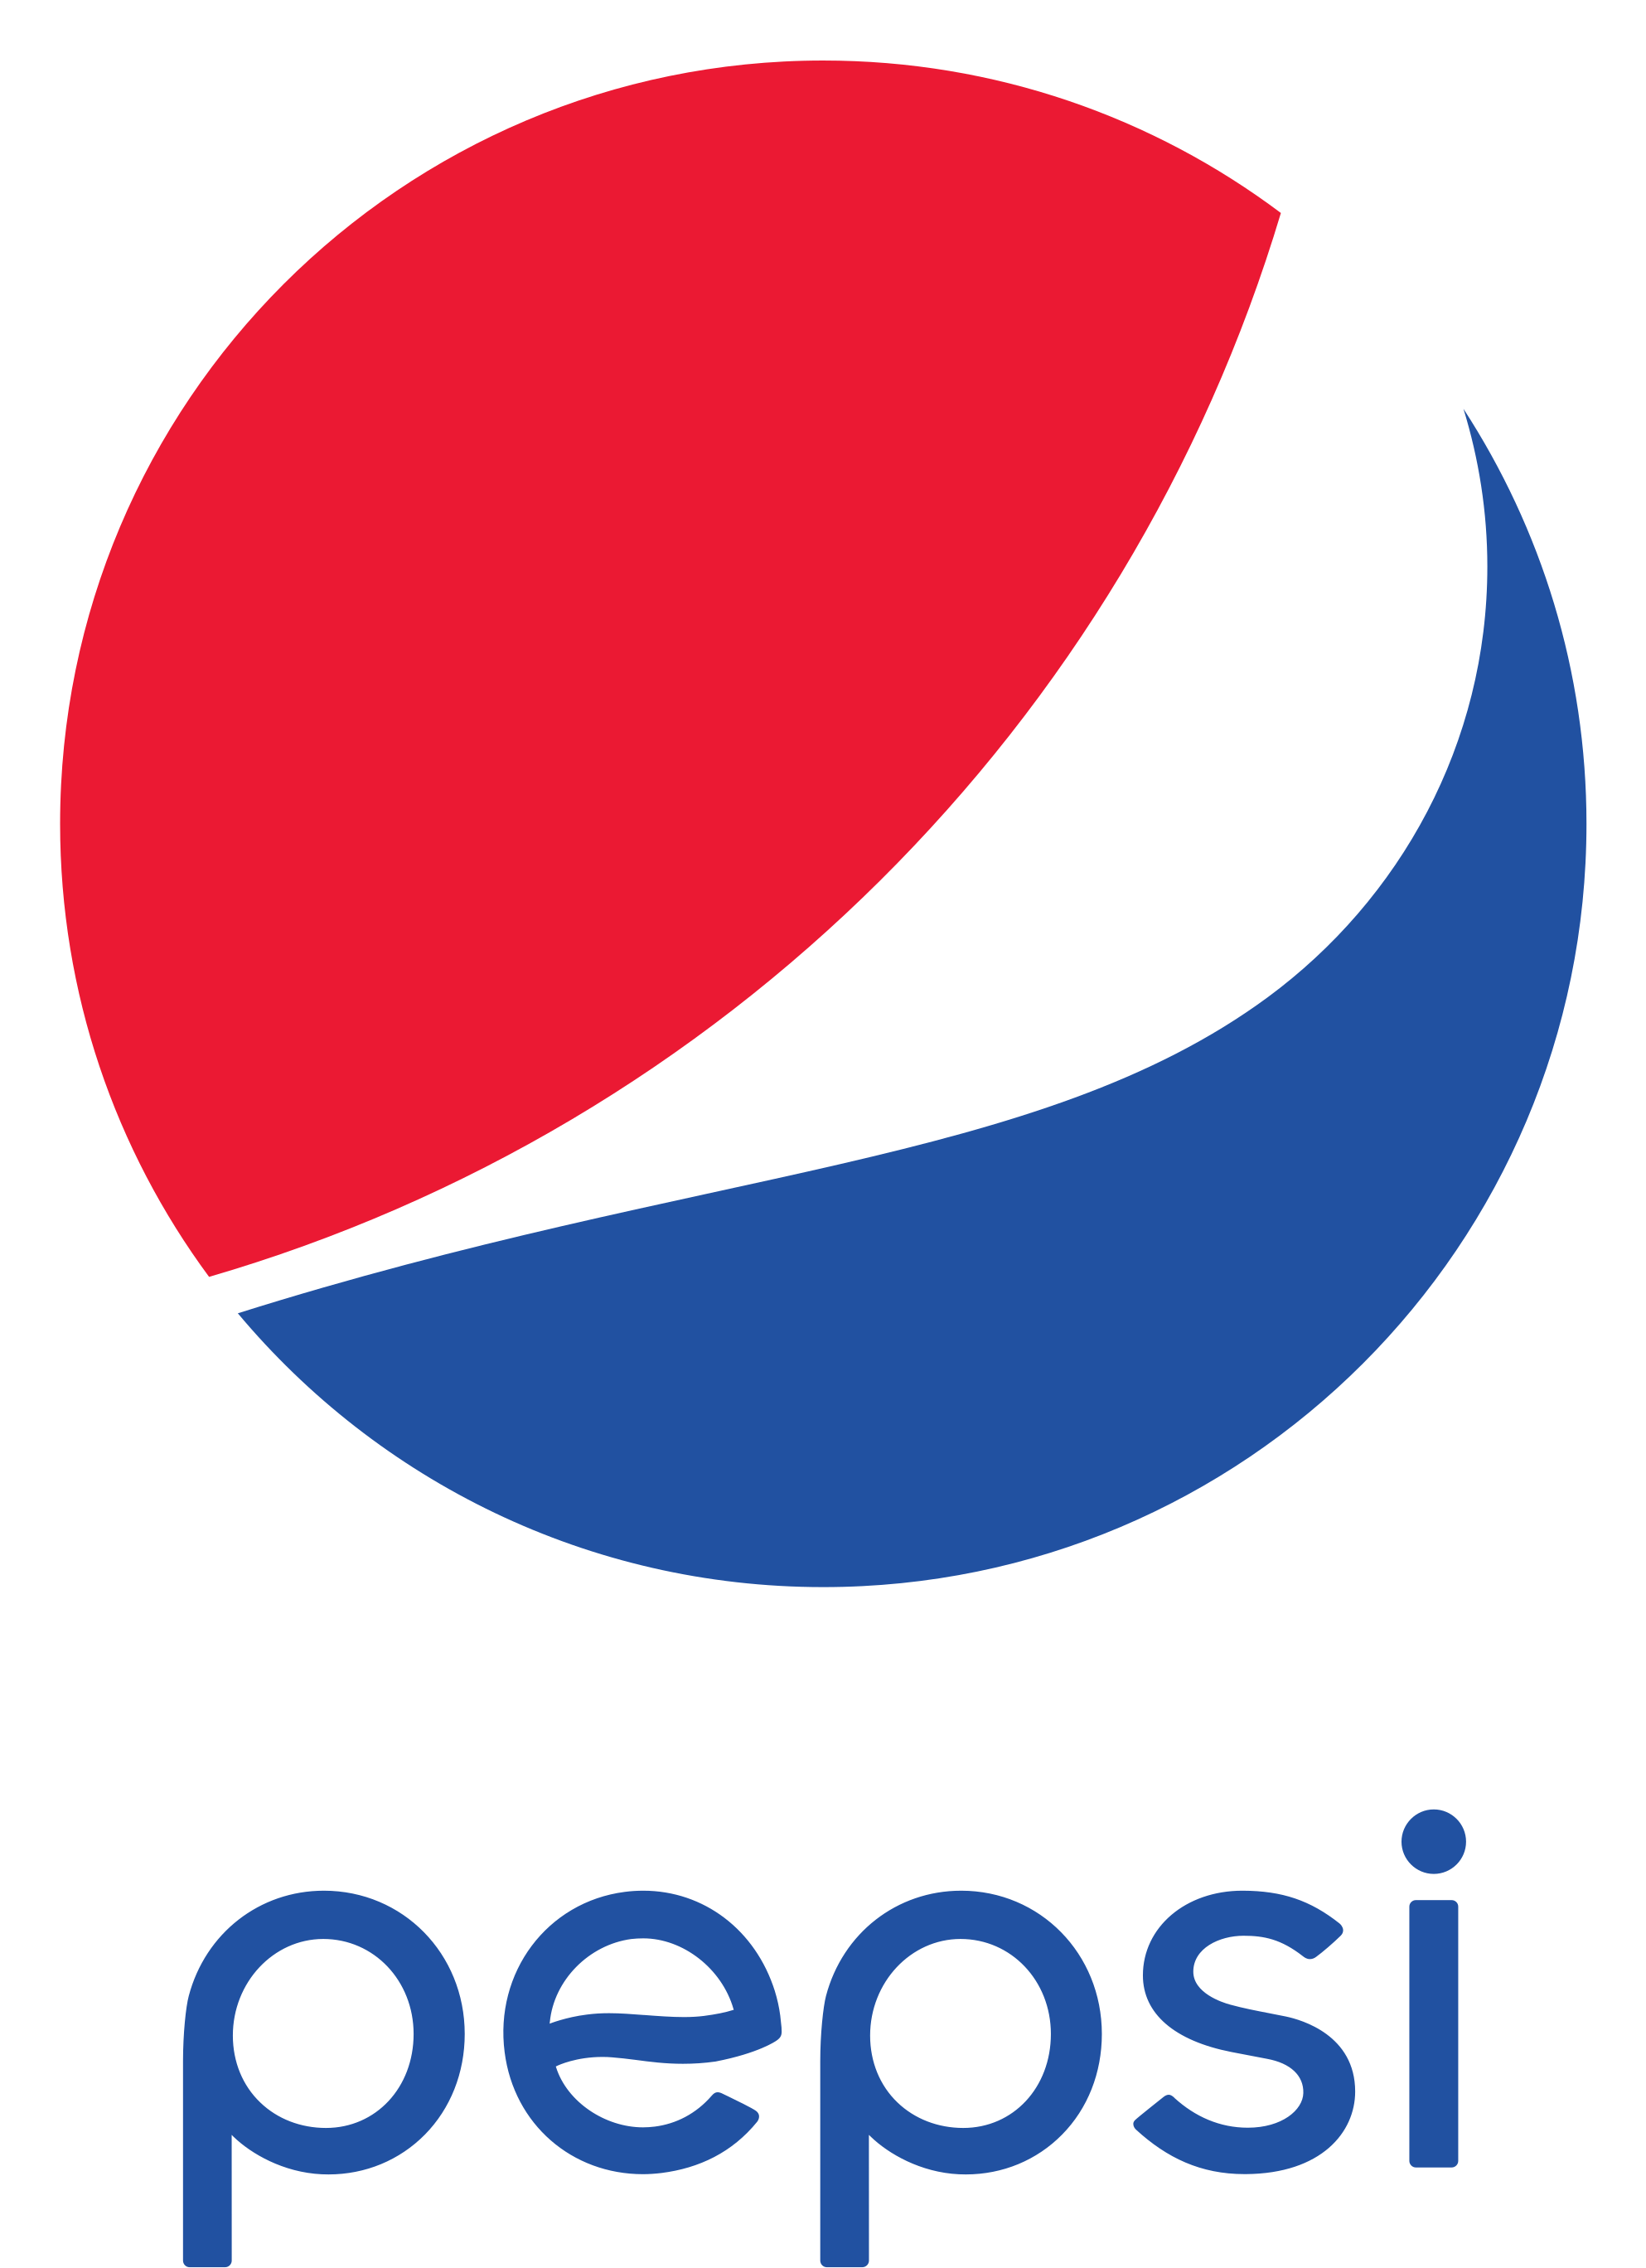 The Current Pepsi Logo With The "smiling" Pepsi Globe - Pepsi Logo Png (2000x2752)